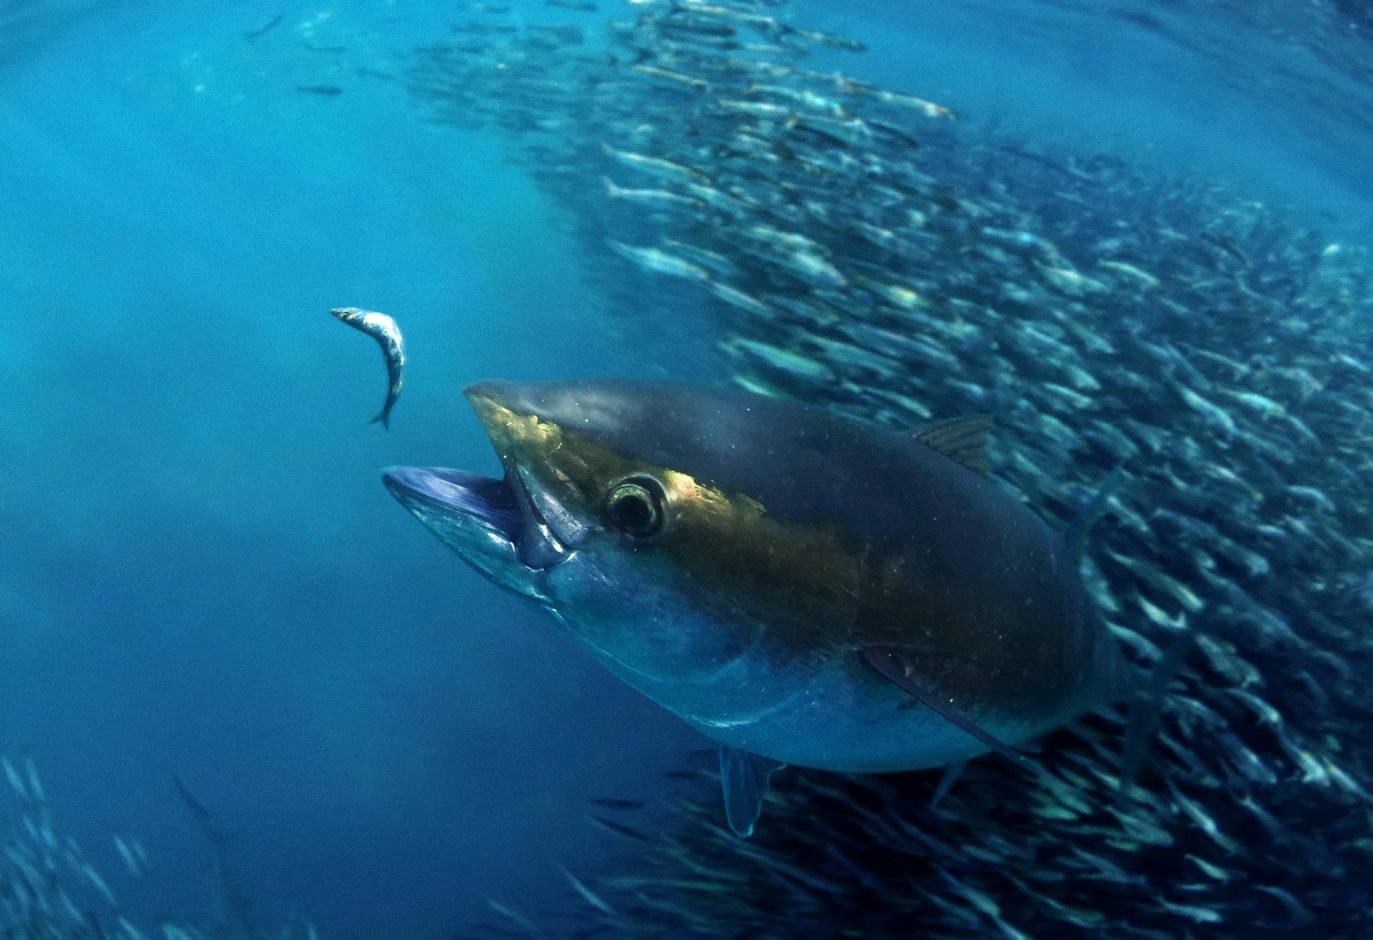 A picture of a bigeye tuna hunting for prey